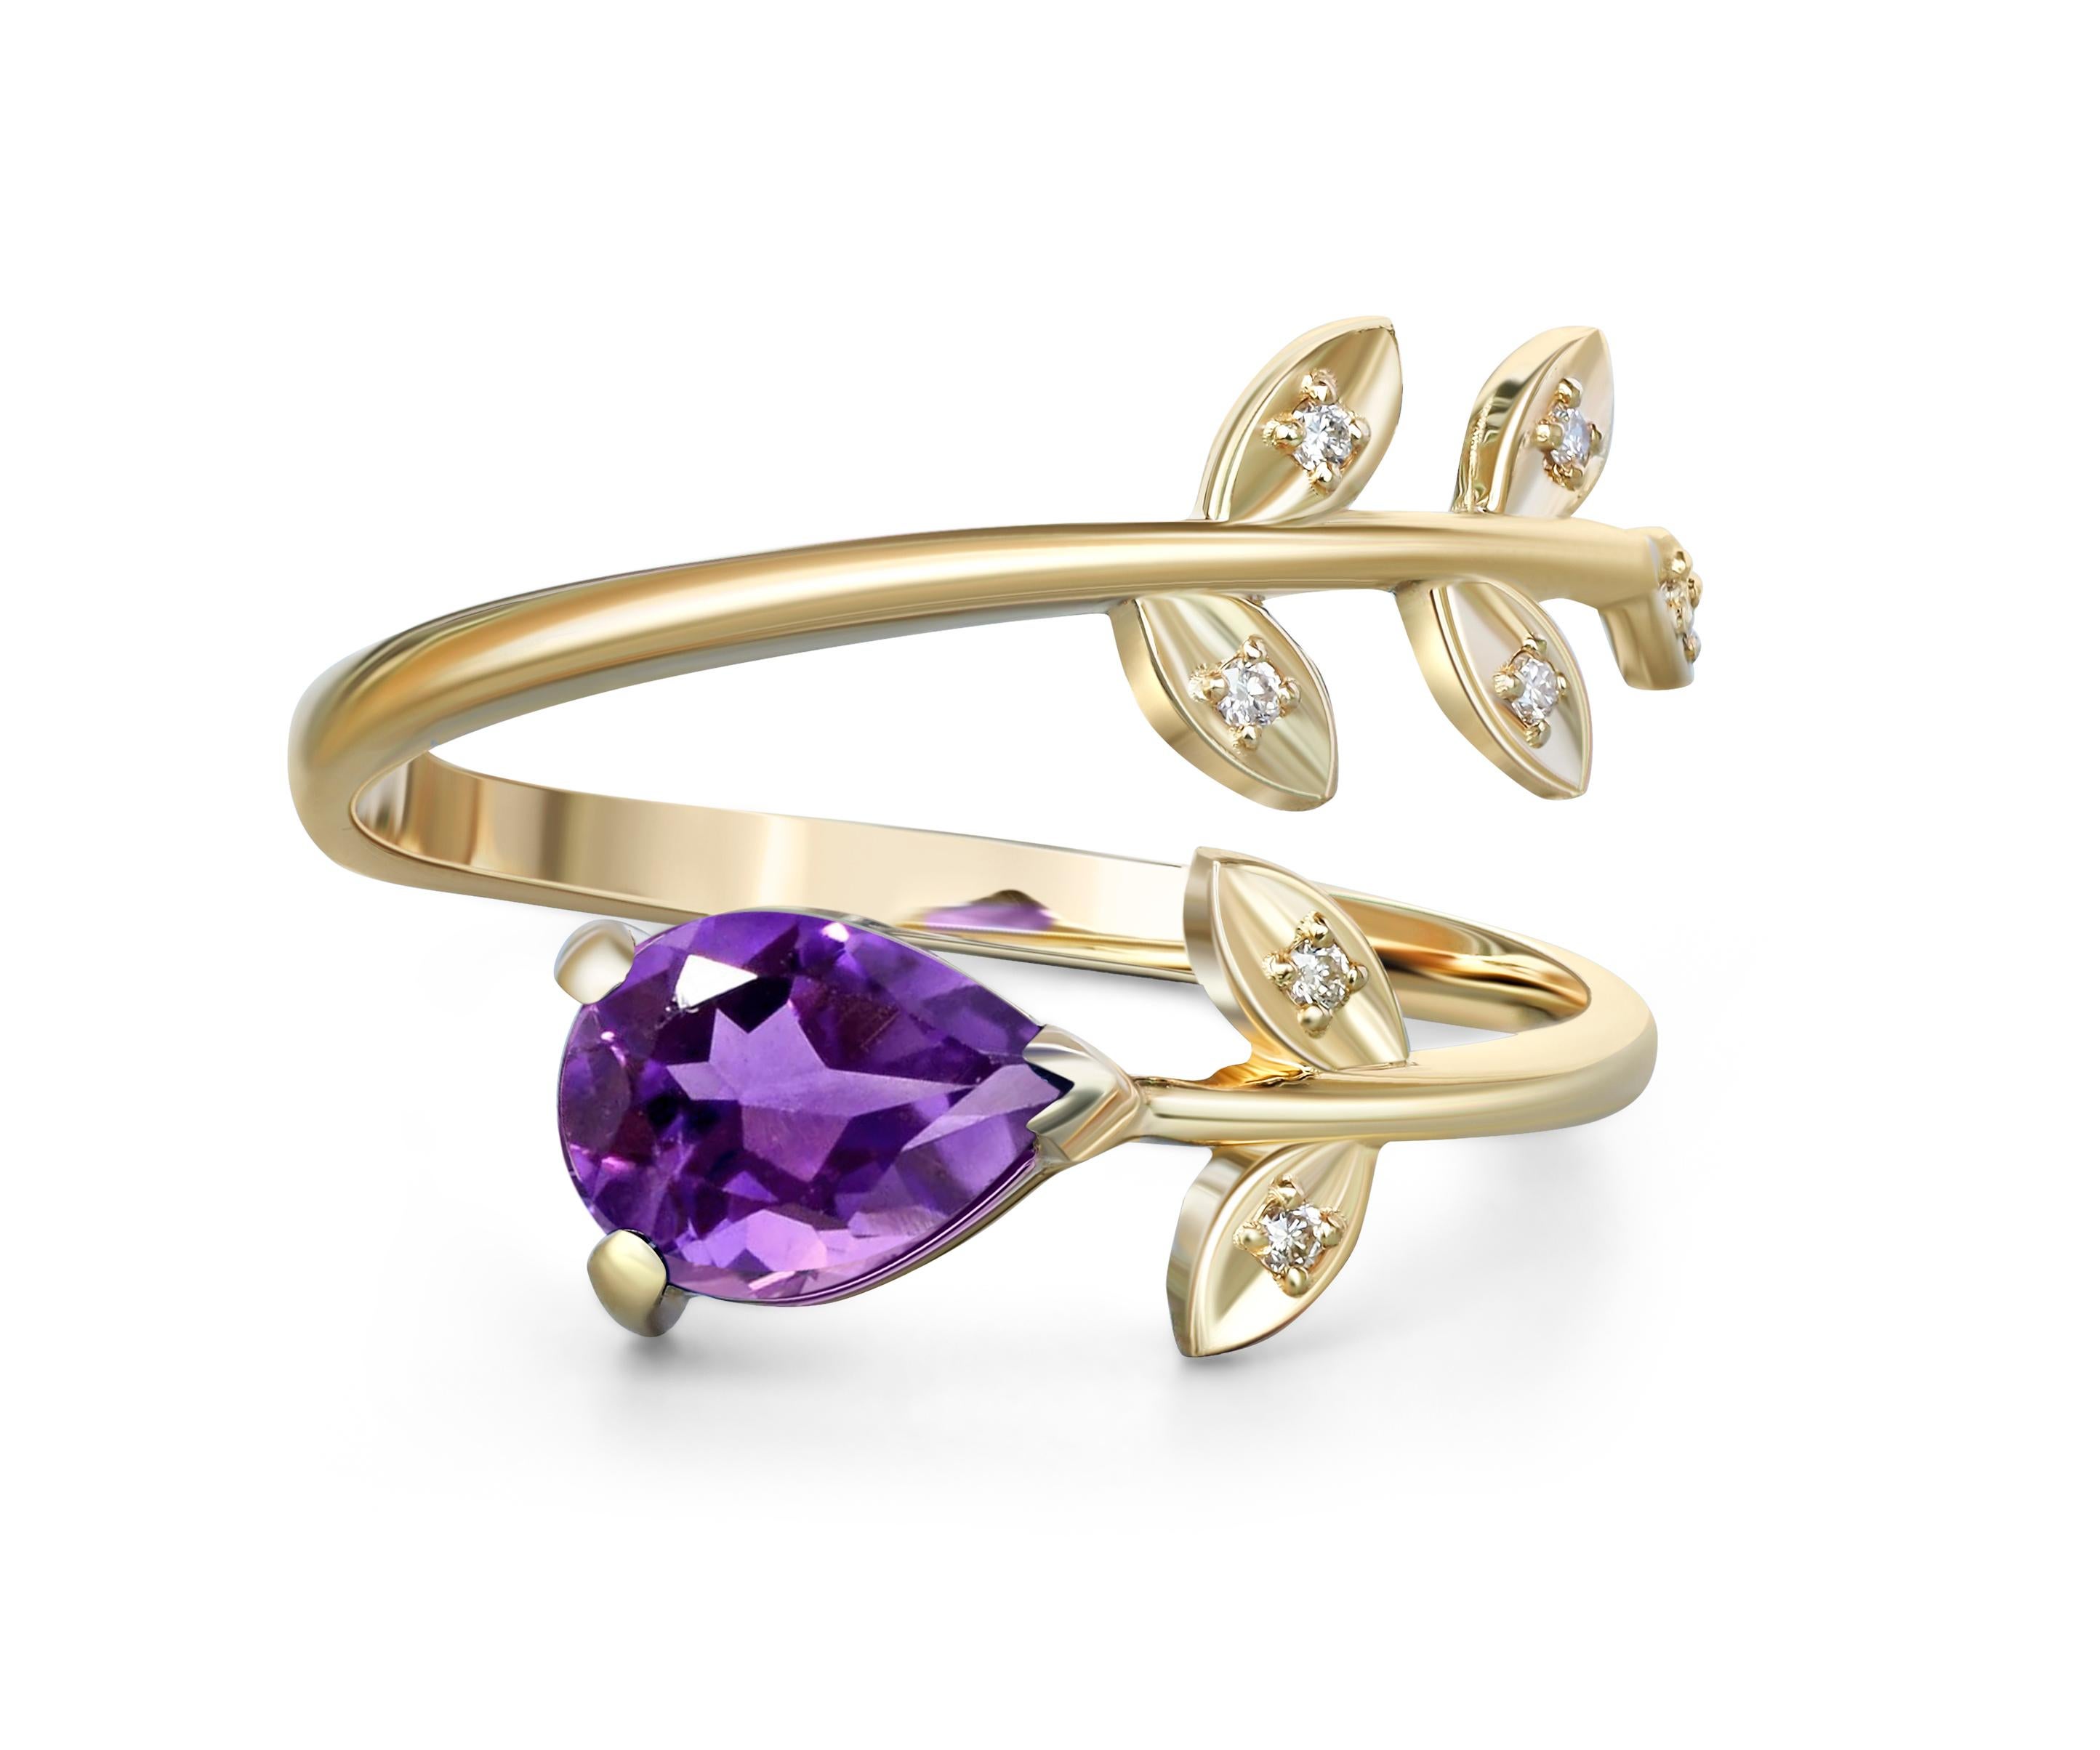 Pear amethyst 14k gold ring. 
Amethyst gold ring. Casual amethyst ring. Gold leaves ring. Floral gold ring. Open ended gold ring.

Metal: 14 k gold
Weight: 2 g. depends from size

Set with amethyst
Pear shape, approx 0.8 ct, purple color.
Clarity: